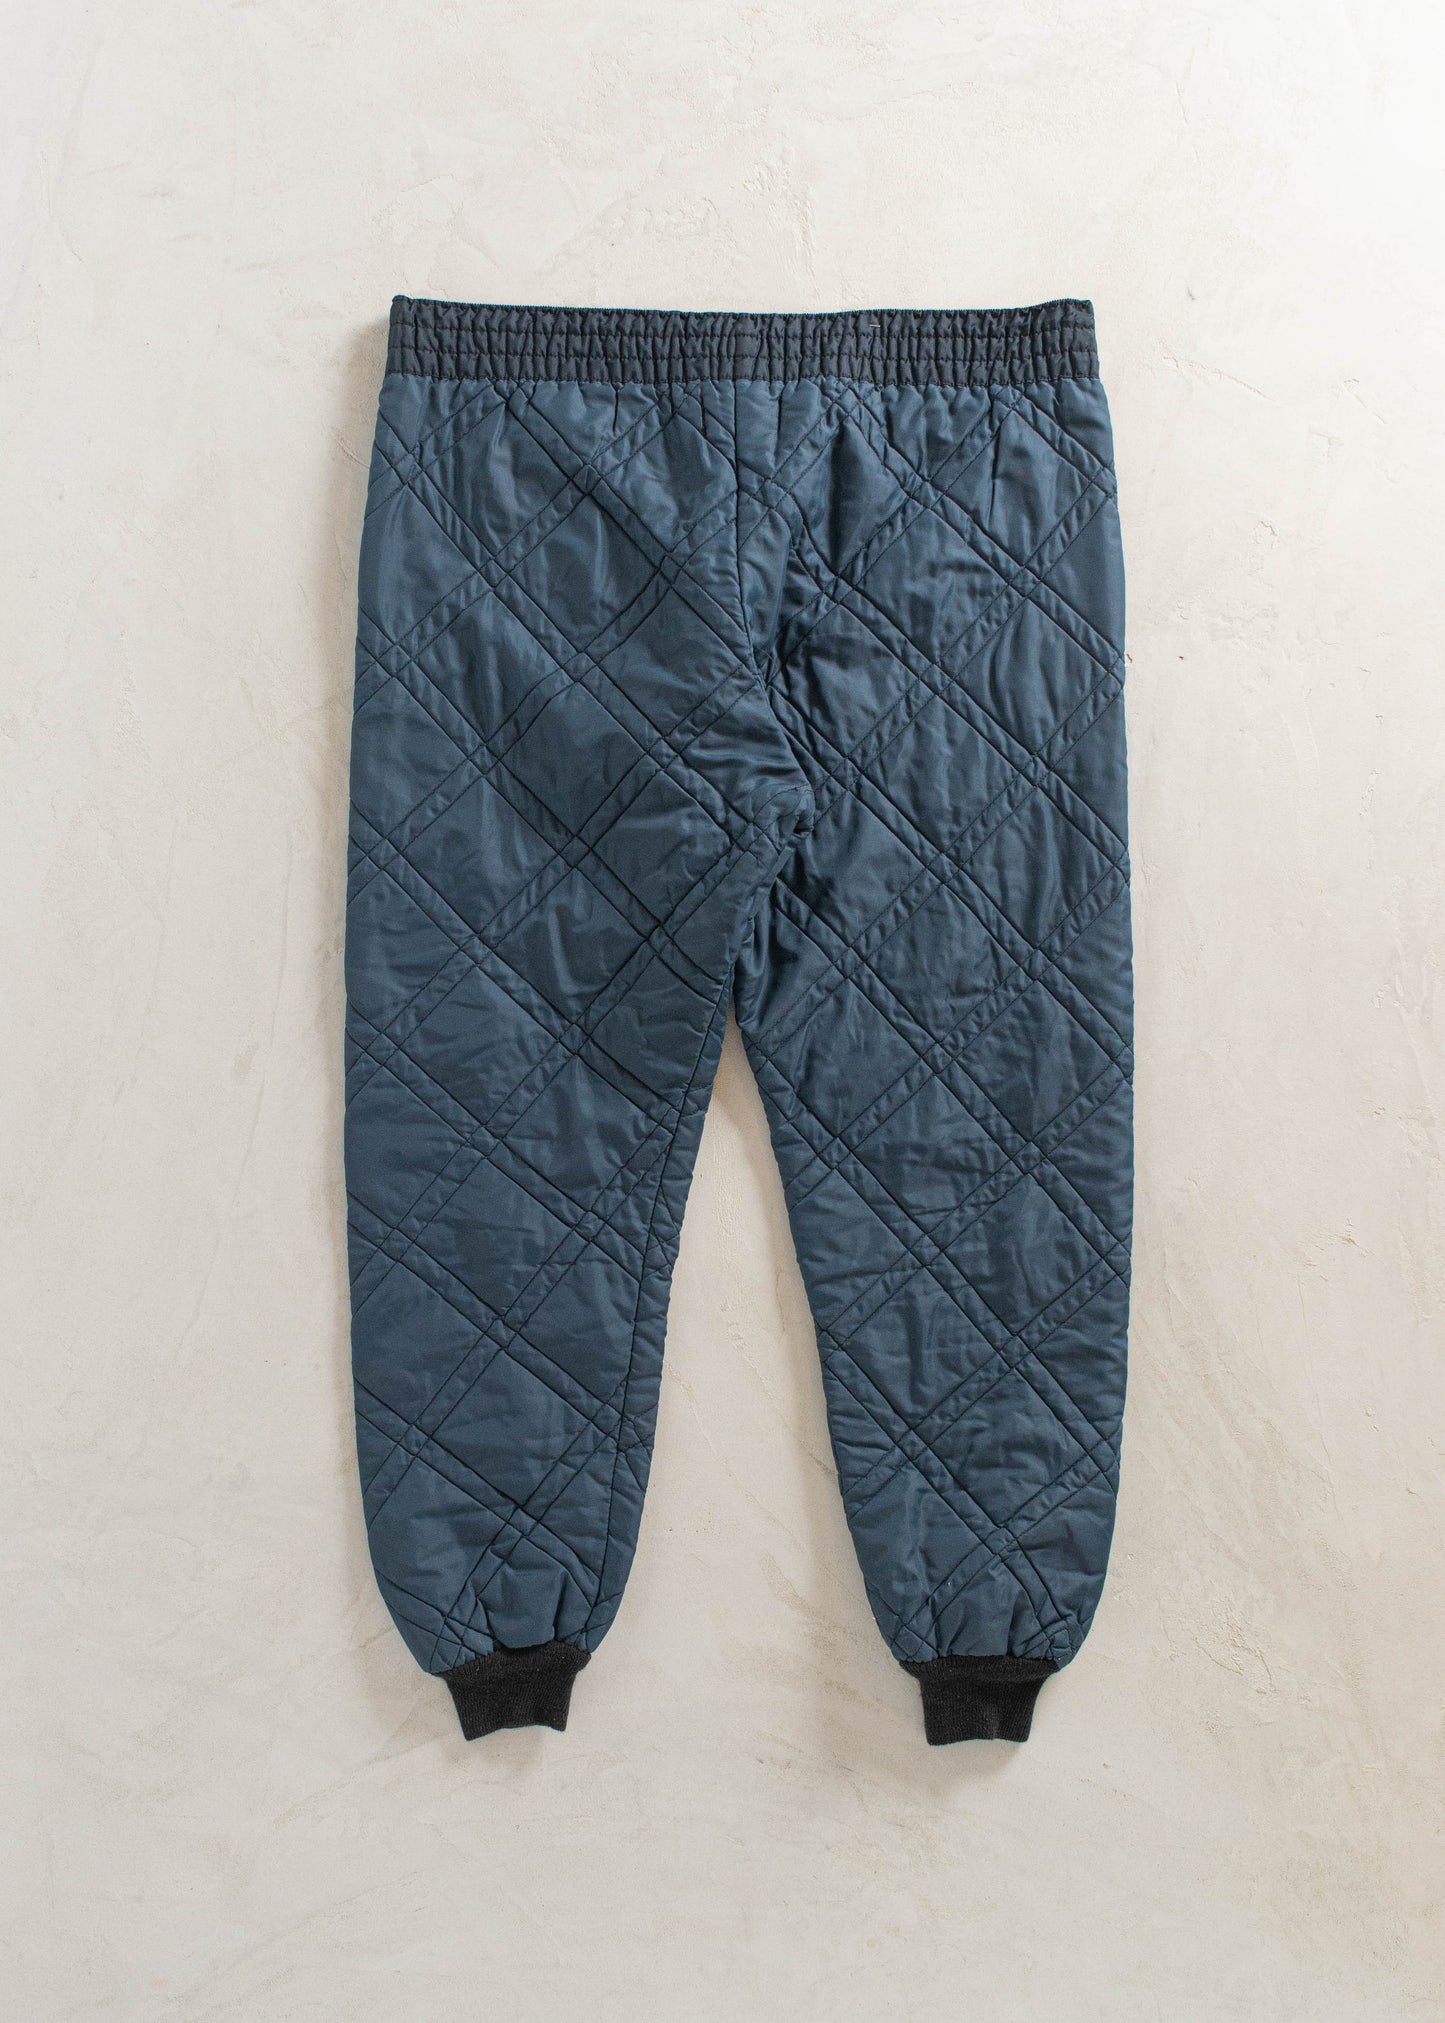 1980s Spruce Creek Sportswear Quilted Liner Pants Size 2XL/3XL